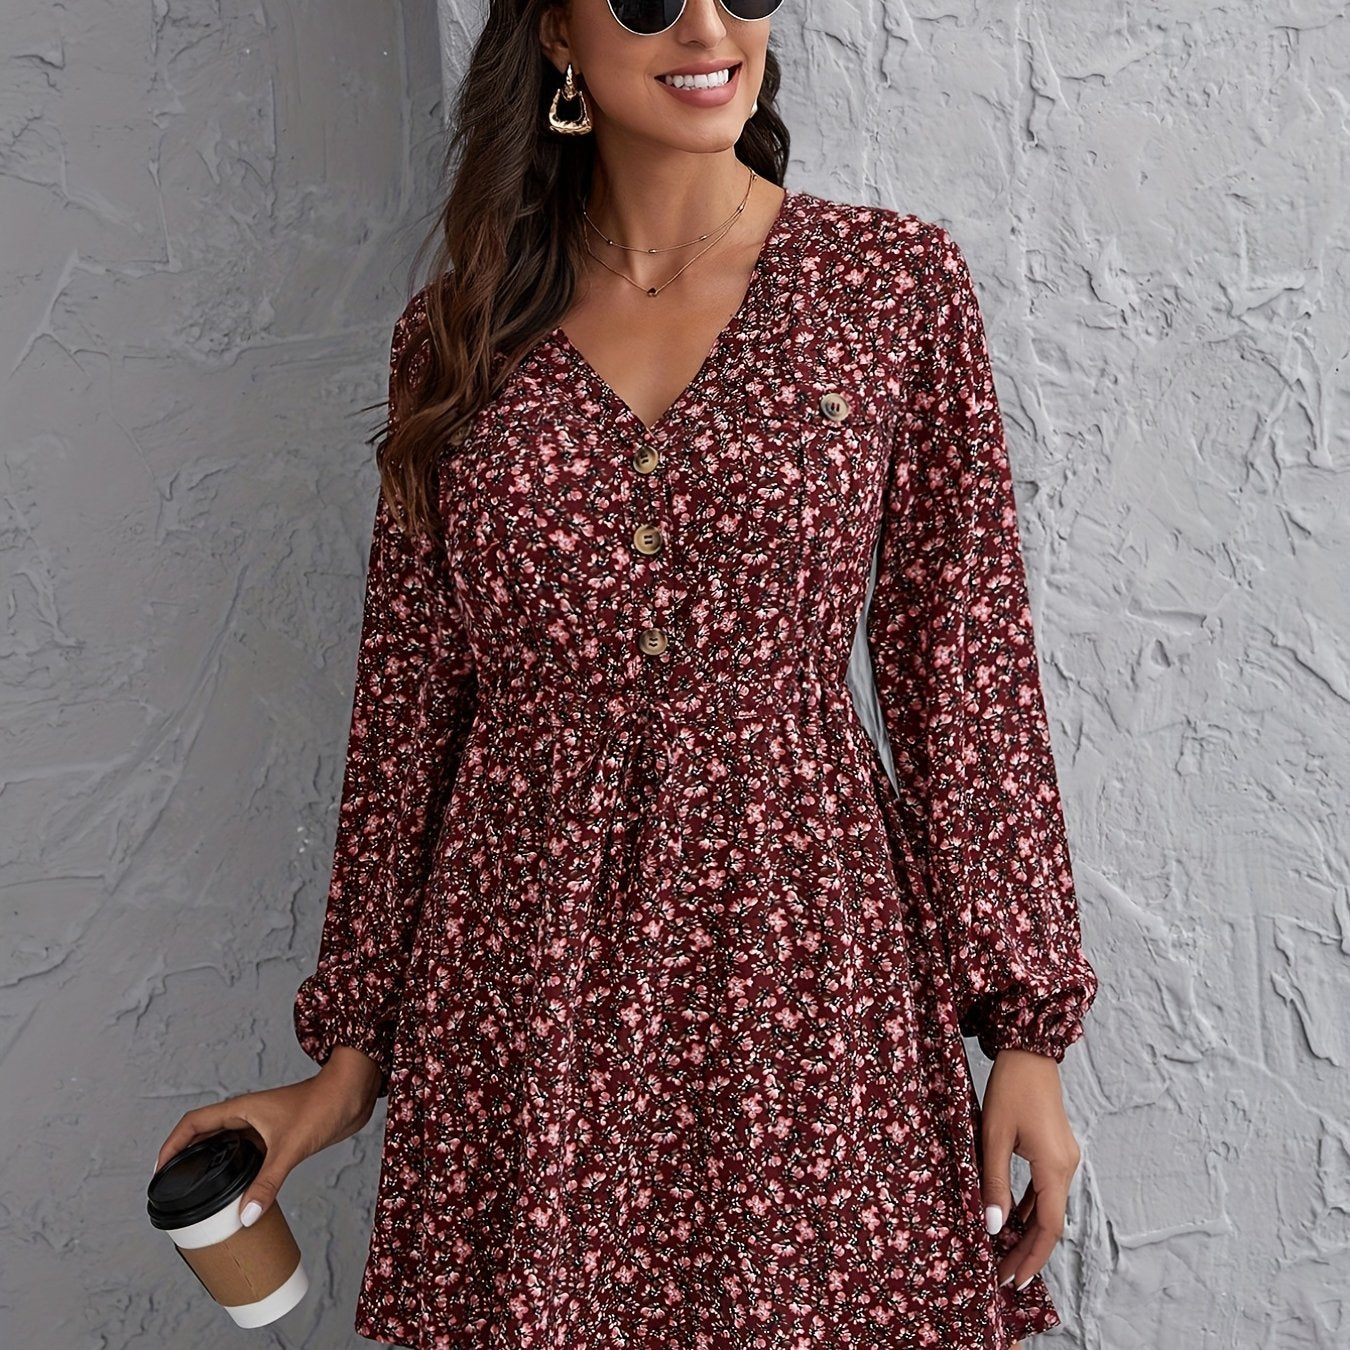 Antmvs Ditsy Floral Print Dress, Elegant V Neck Long Sleeve Dress With Buttons, Women's Clothing